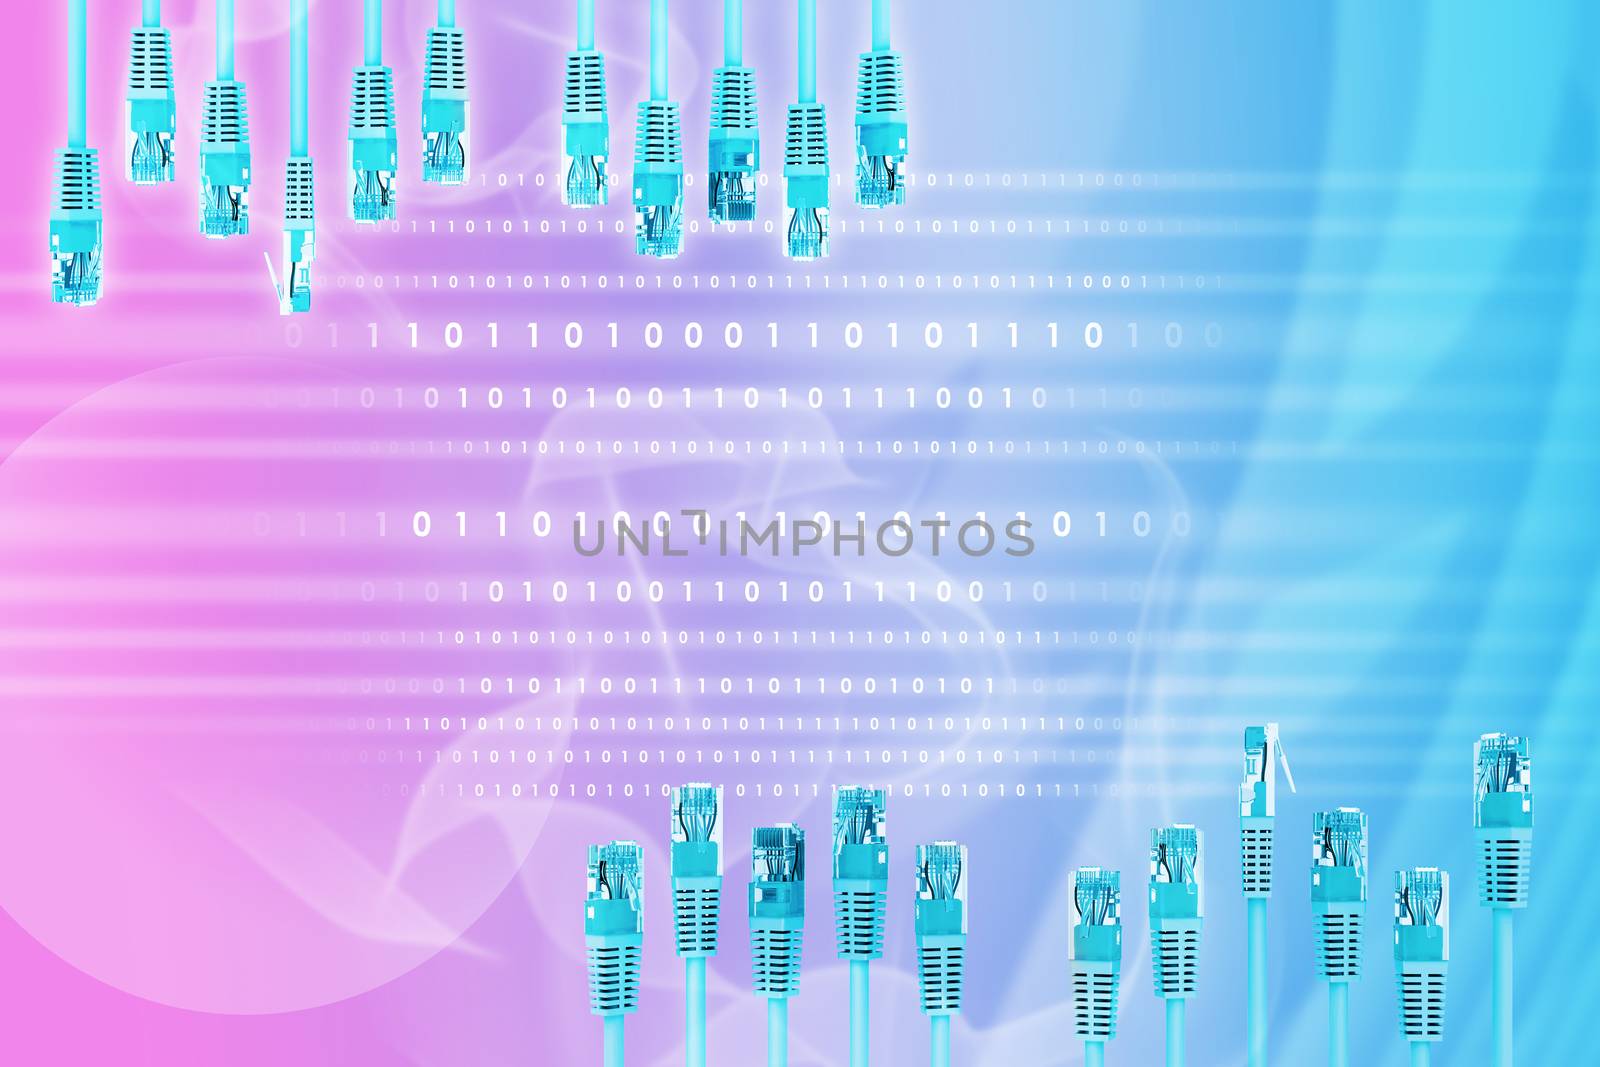 Set of computer wires on abstract colorful background with numbers